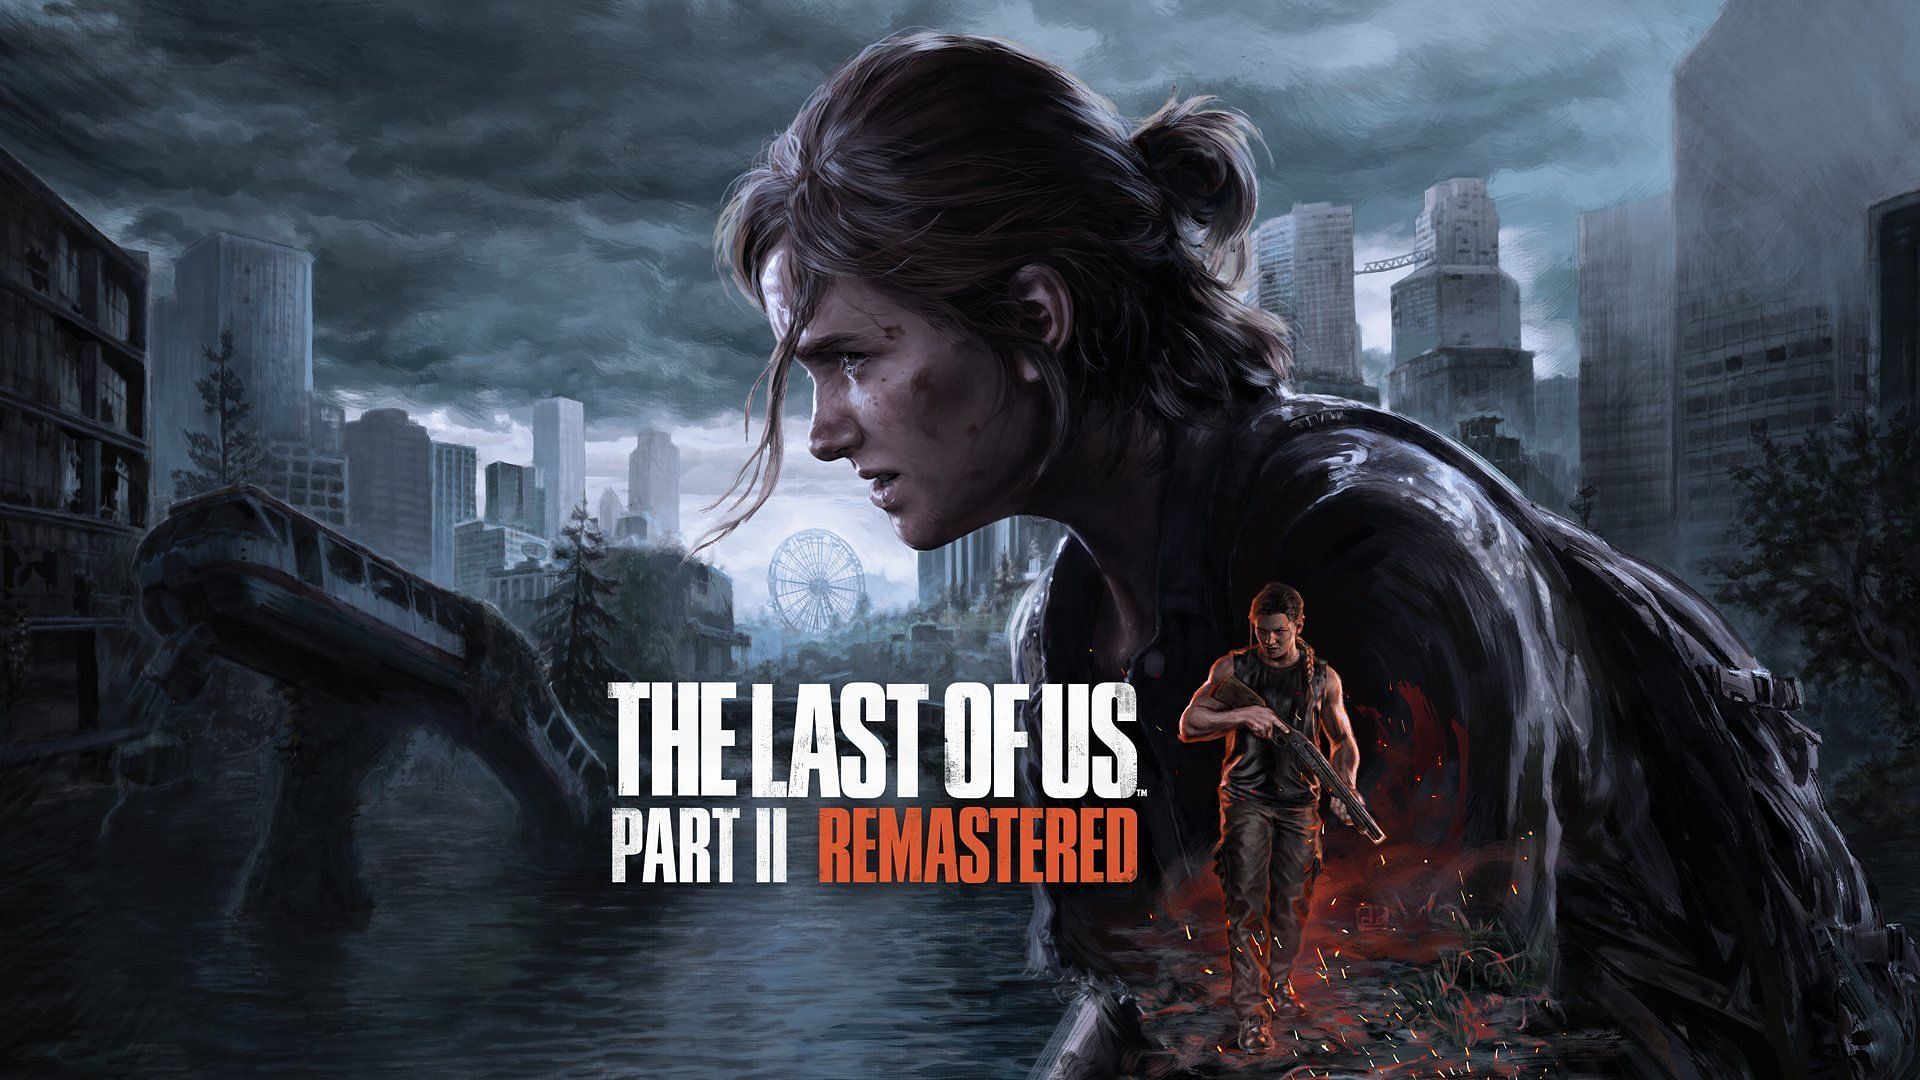 The Last Of Us Part 2 Remastered Ps5 Upgrade Guide Price Additional Features And More Explored 